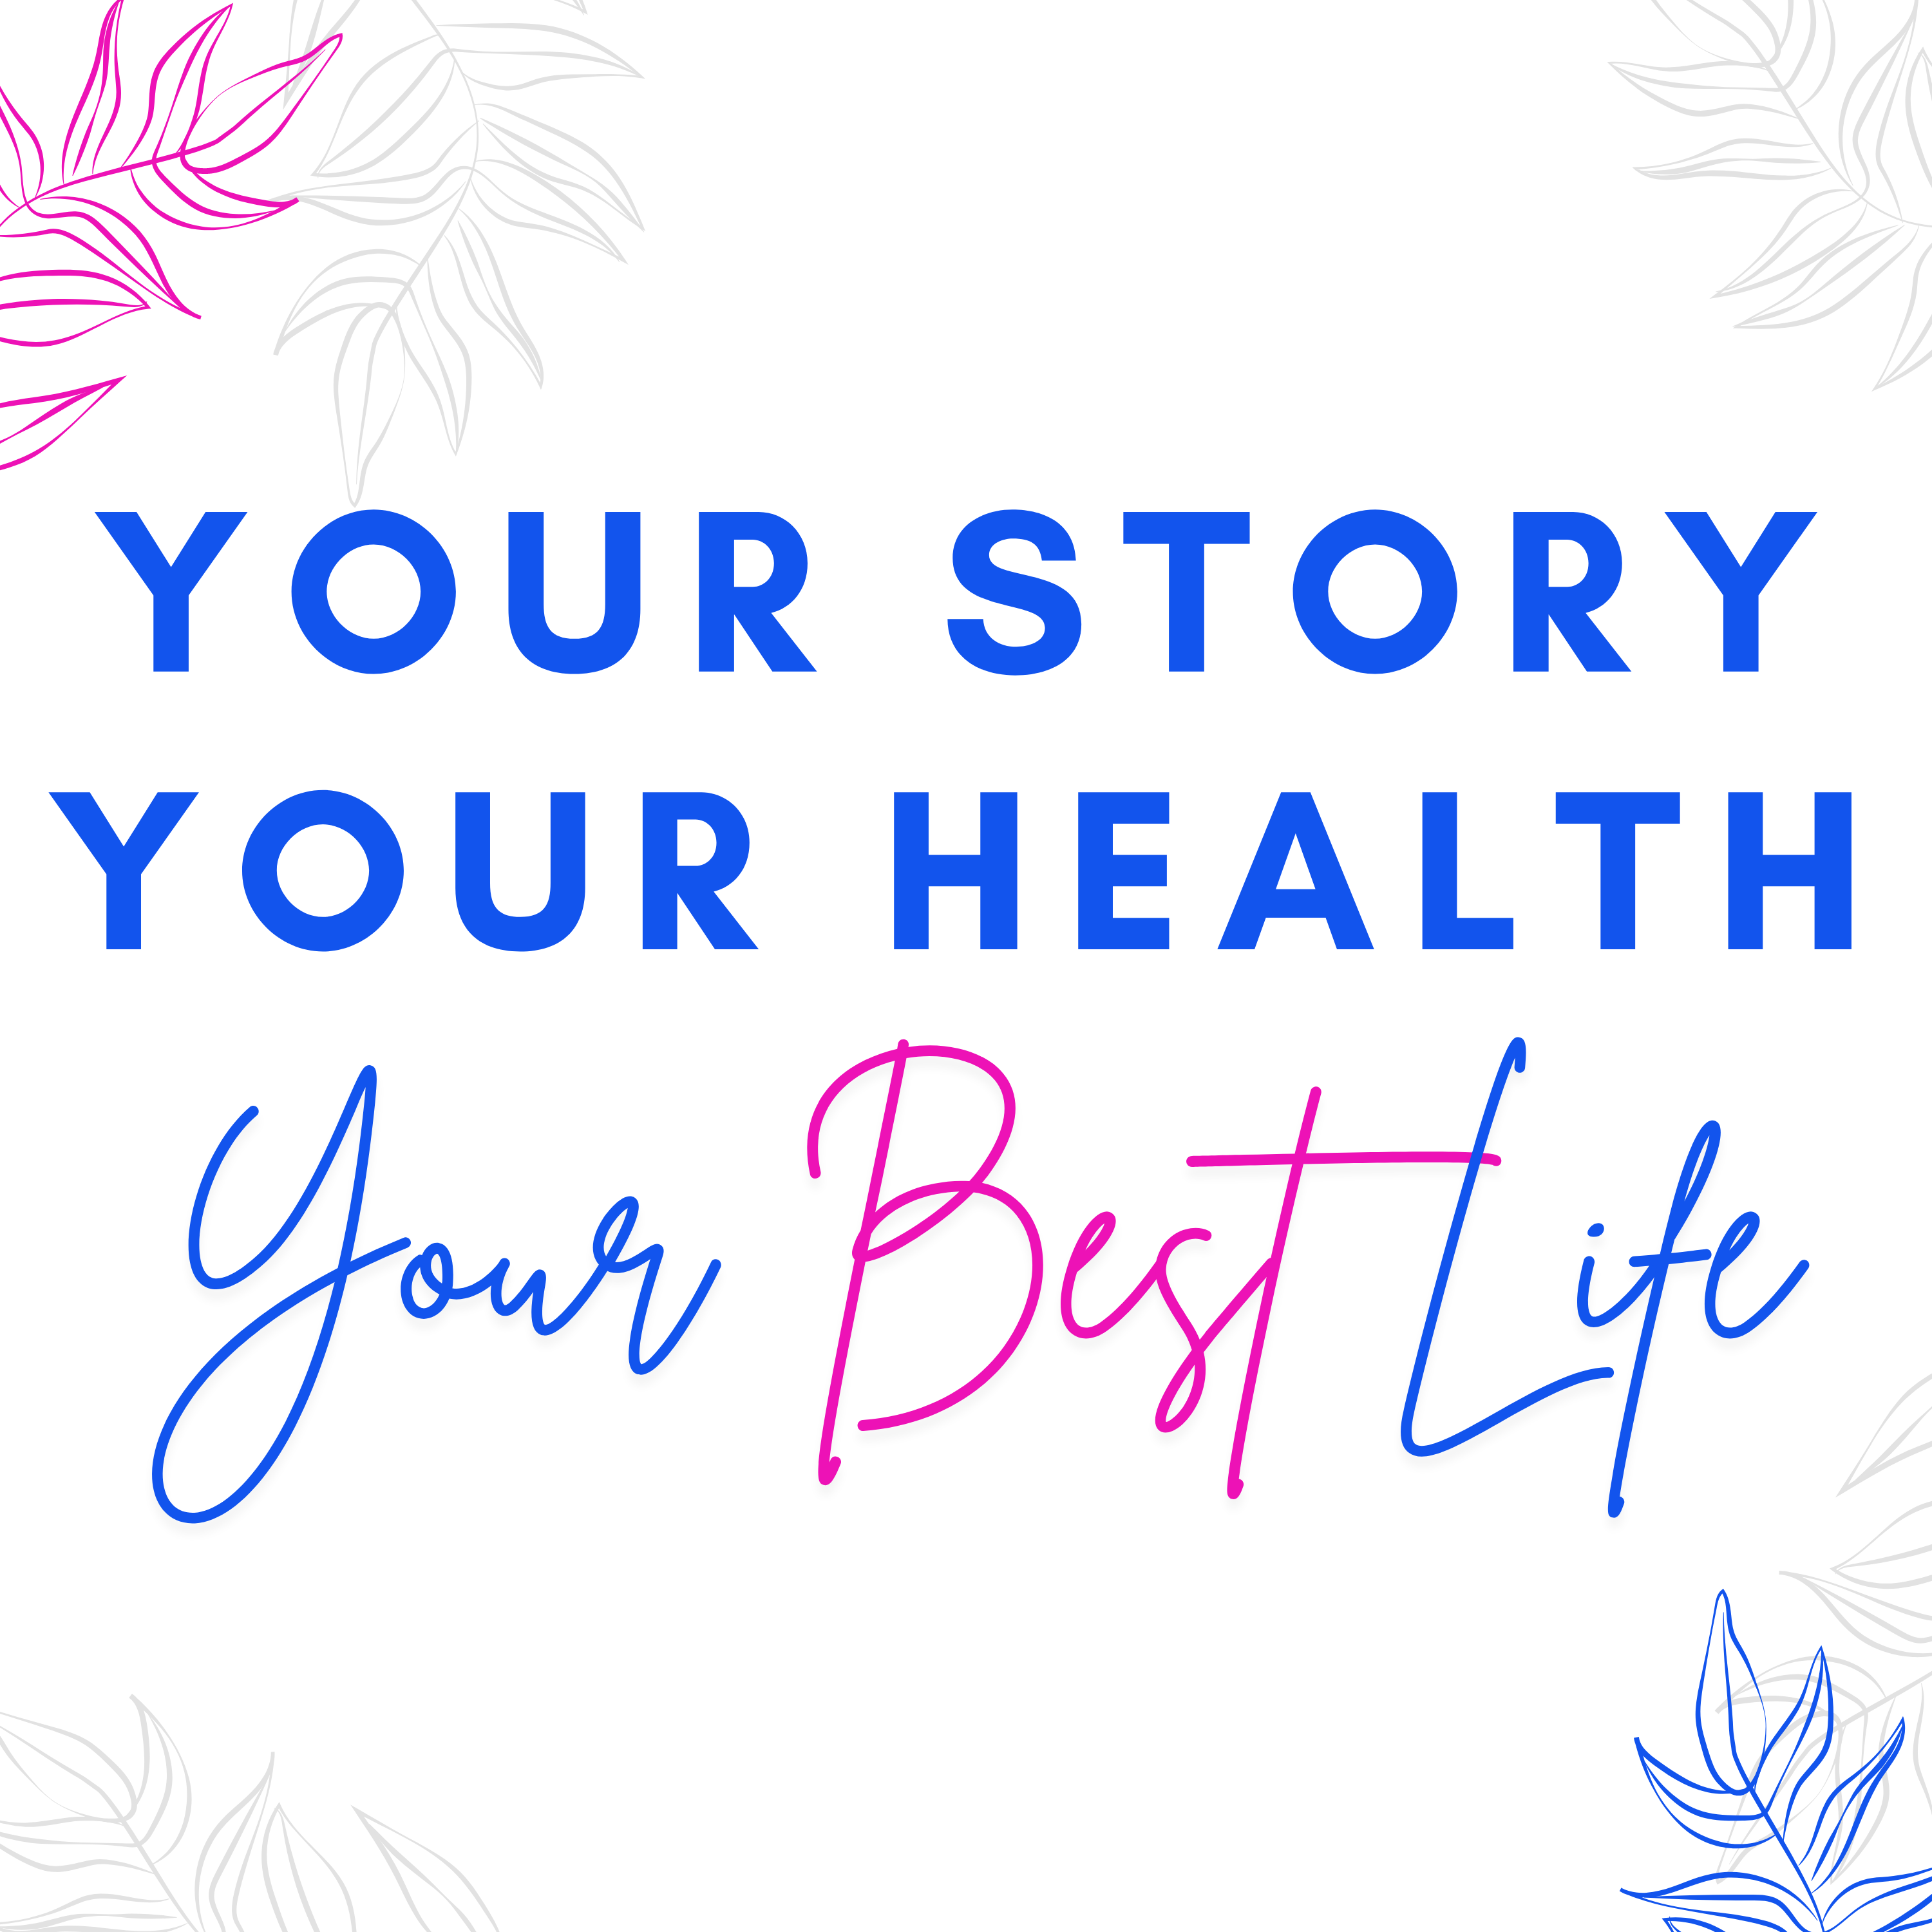 Your Story, Your Health, Your Best Life